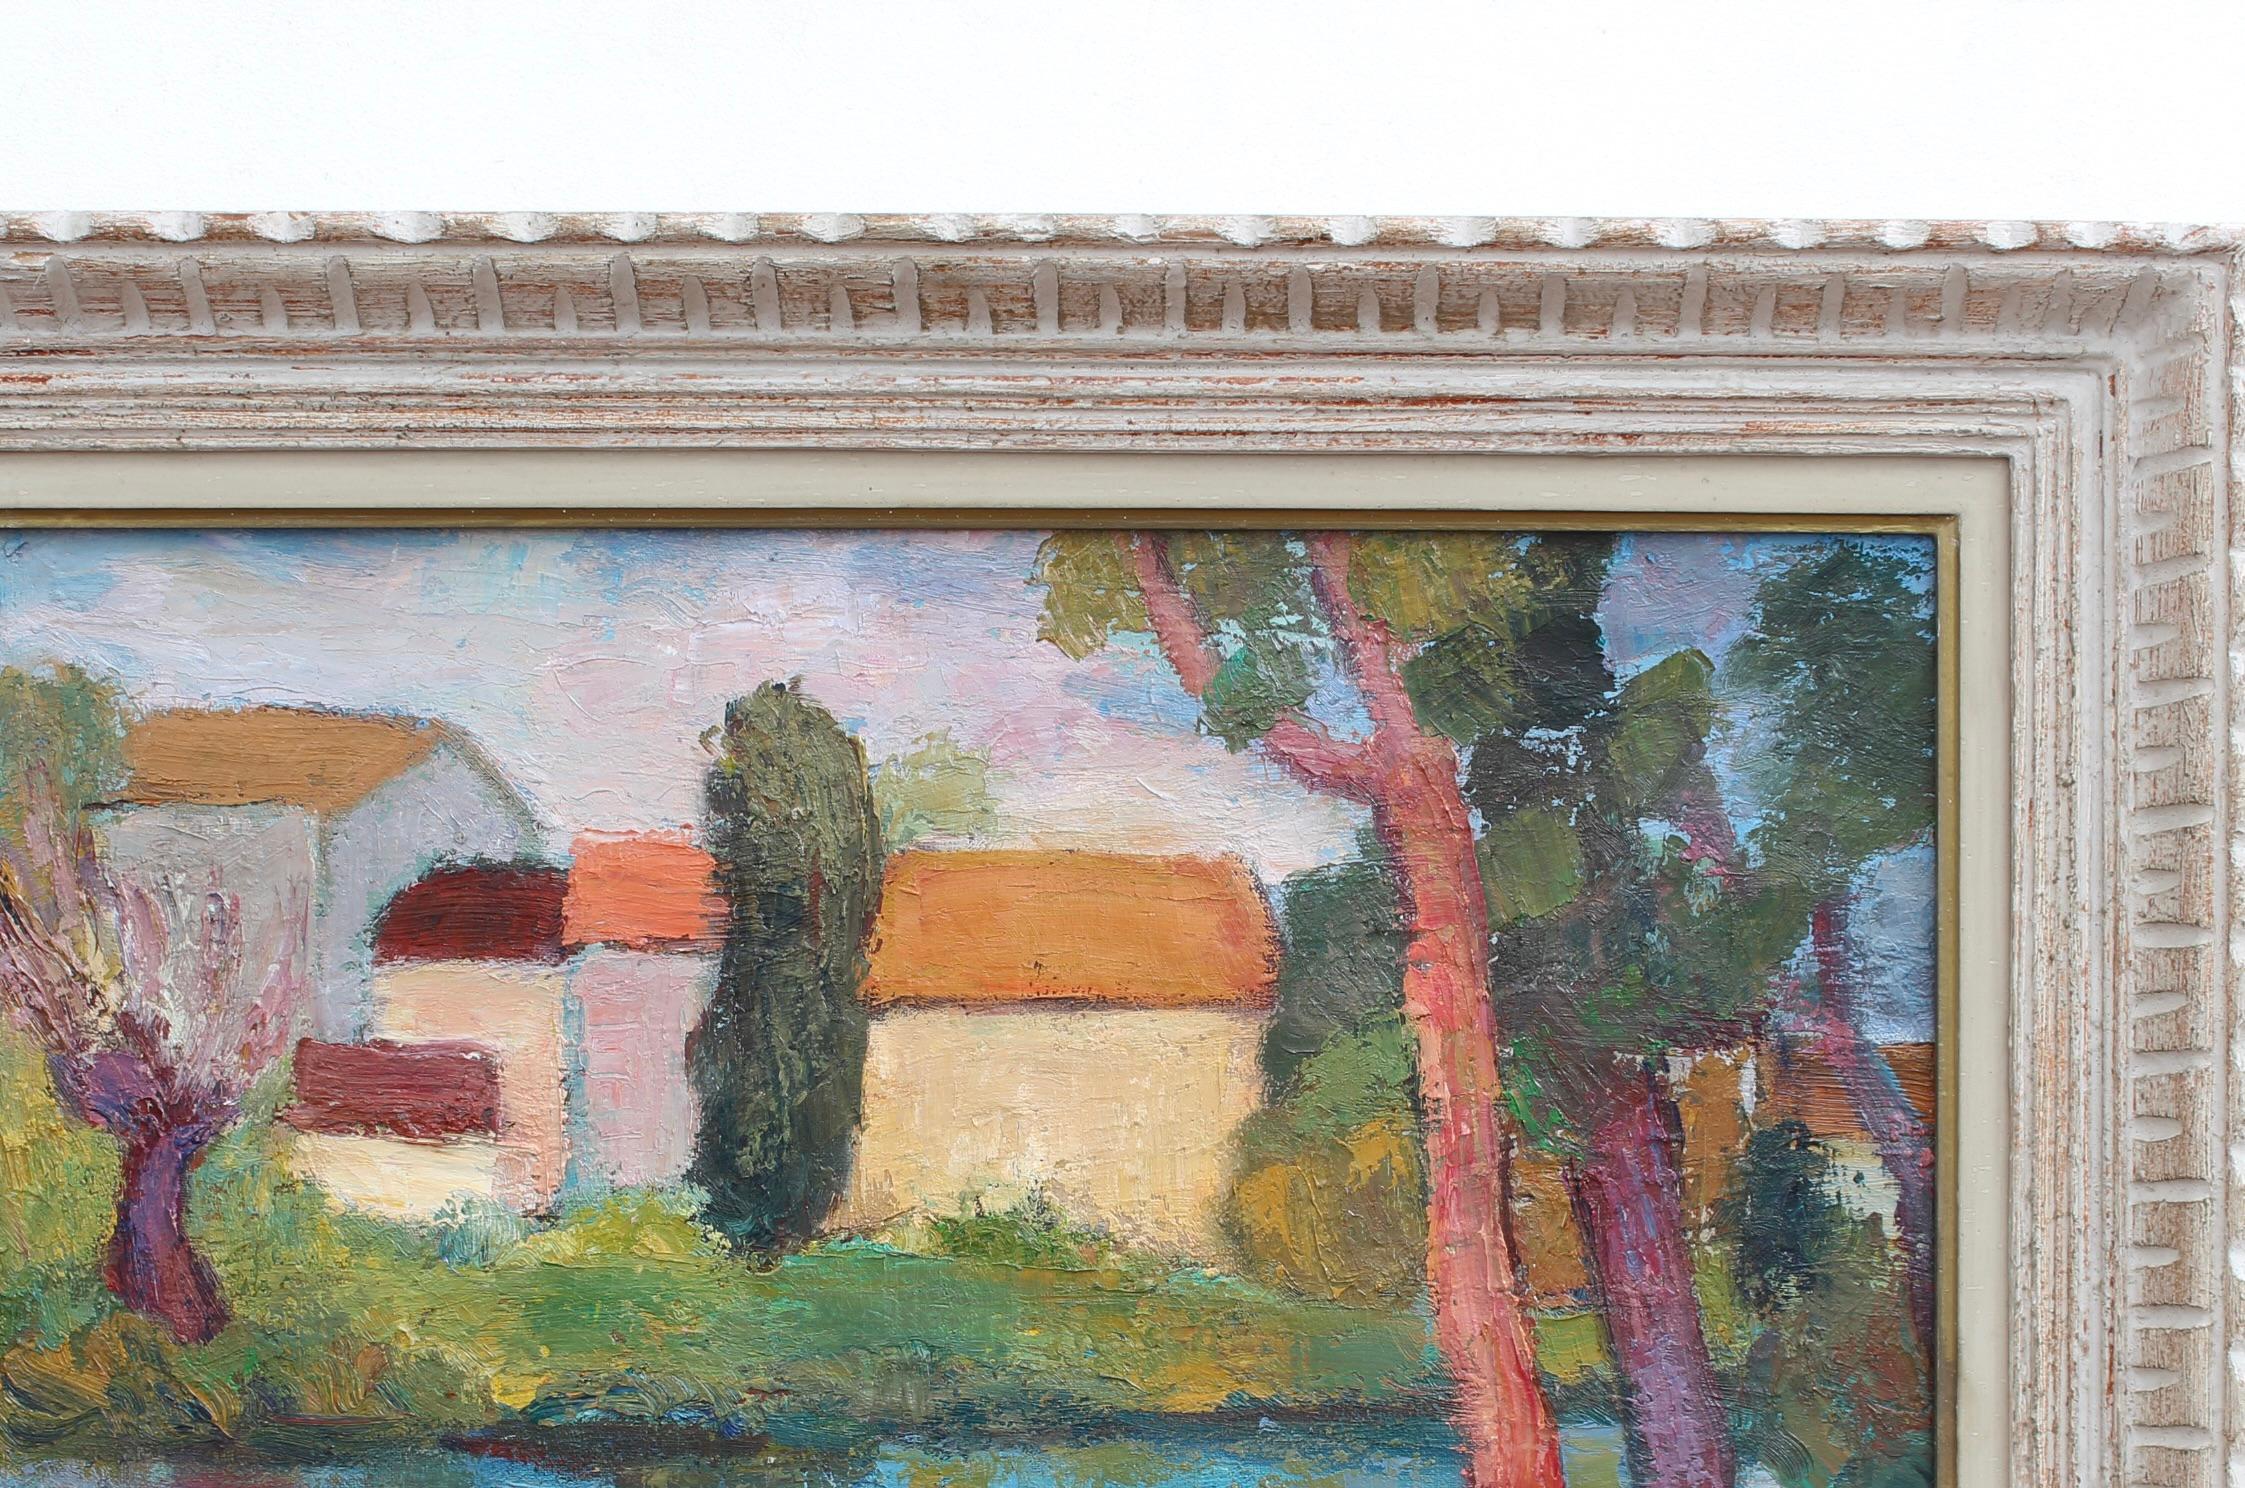 'Provençal Landscape', oil on canvas, by Anna Costa (circa 1950s). This is an exceptional landscape painted by the artist in vibrant colours in an Impressionist style. Traditional homes reflect in the pristine river meandering nearby (most likely